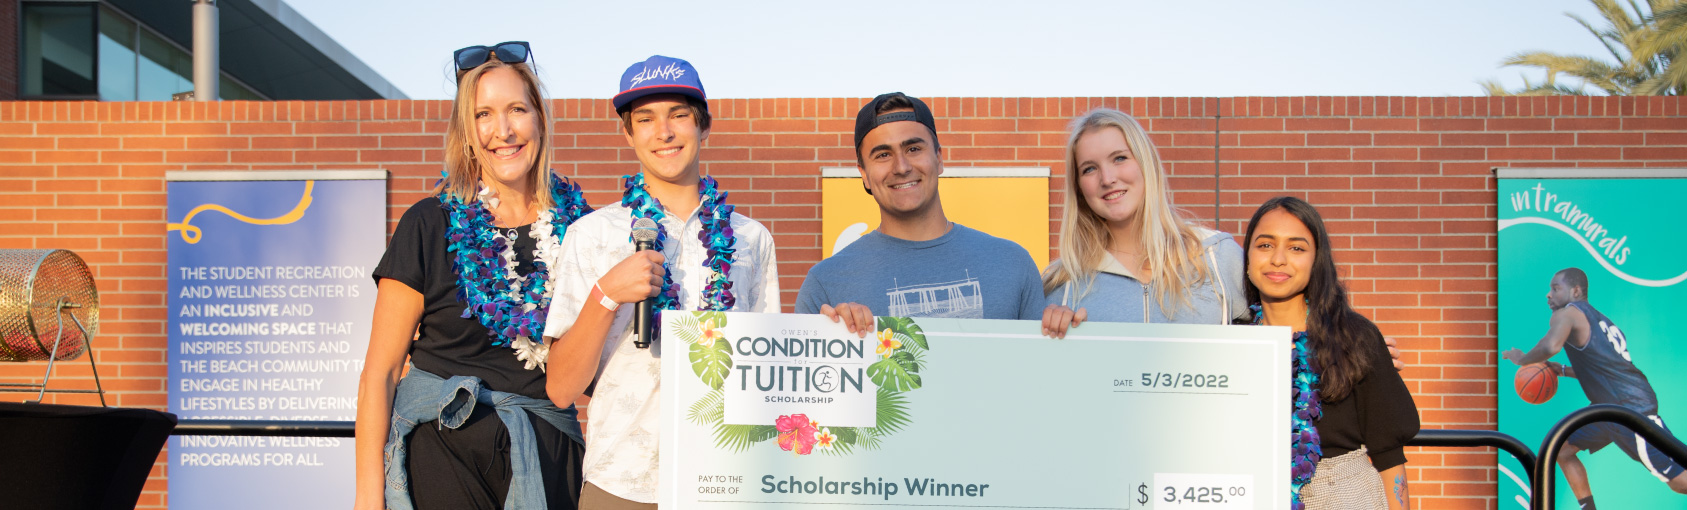 Owens-Condition-For-Tuition-Winner banner